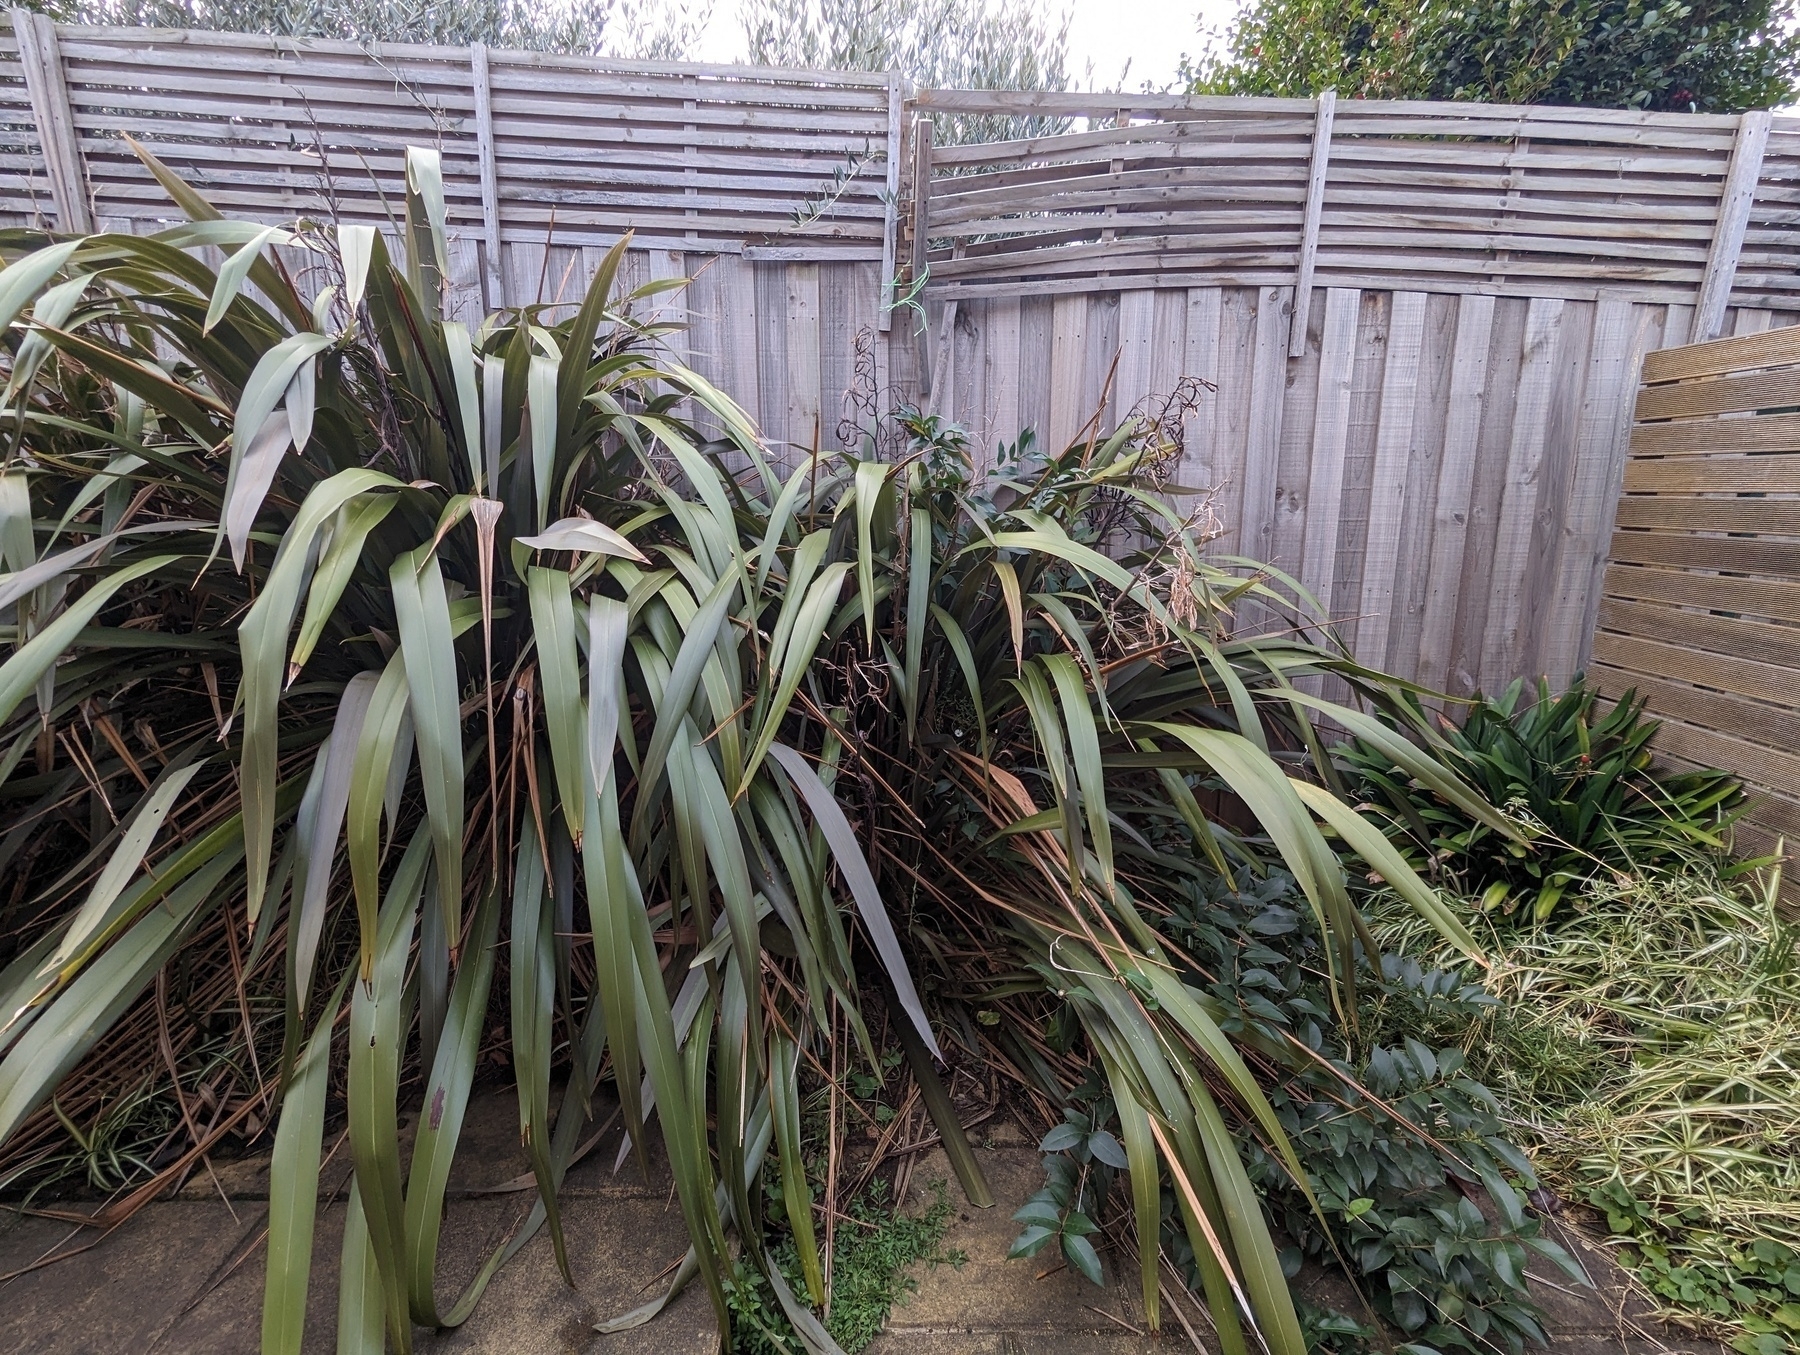 Auto-generated description: A fenced backyard features dense, overgrown plants with long, slender leaves amid a paved ground.